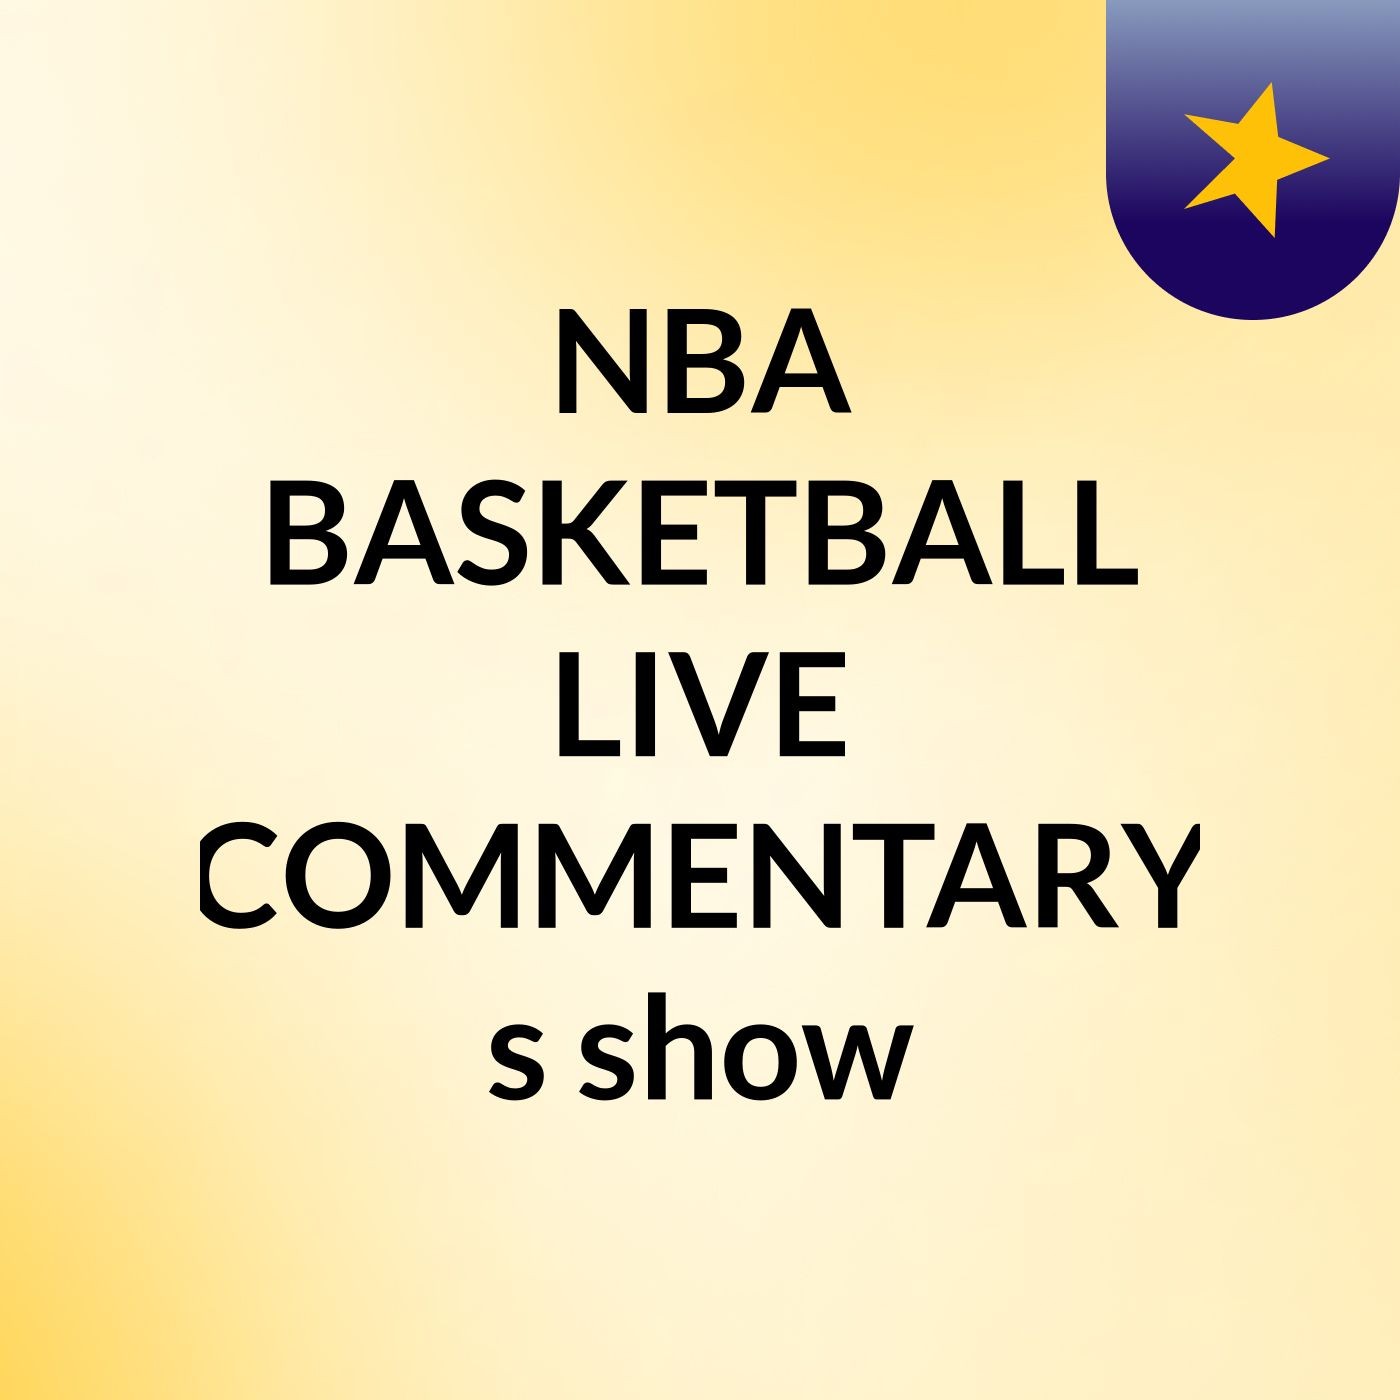 NBA BASKETBALL LIVE COMMENTARY's show